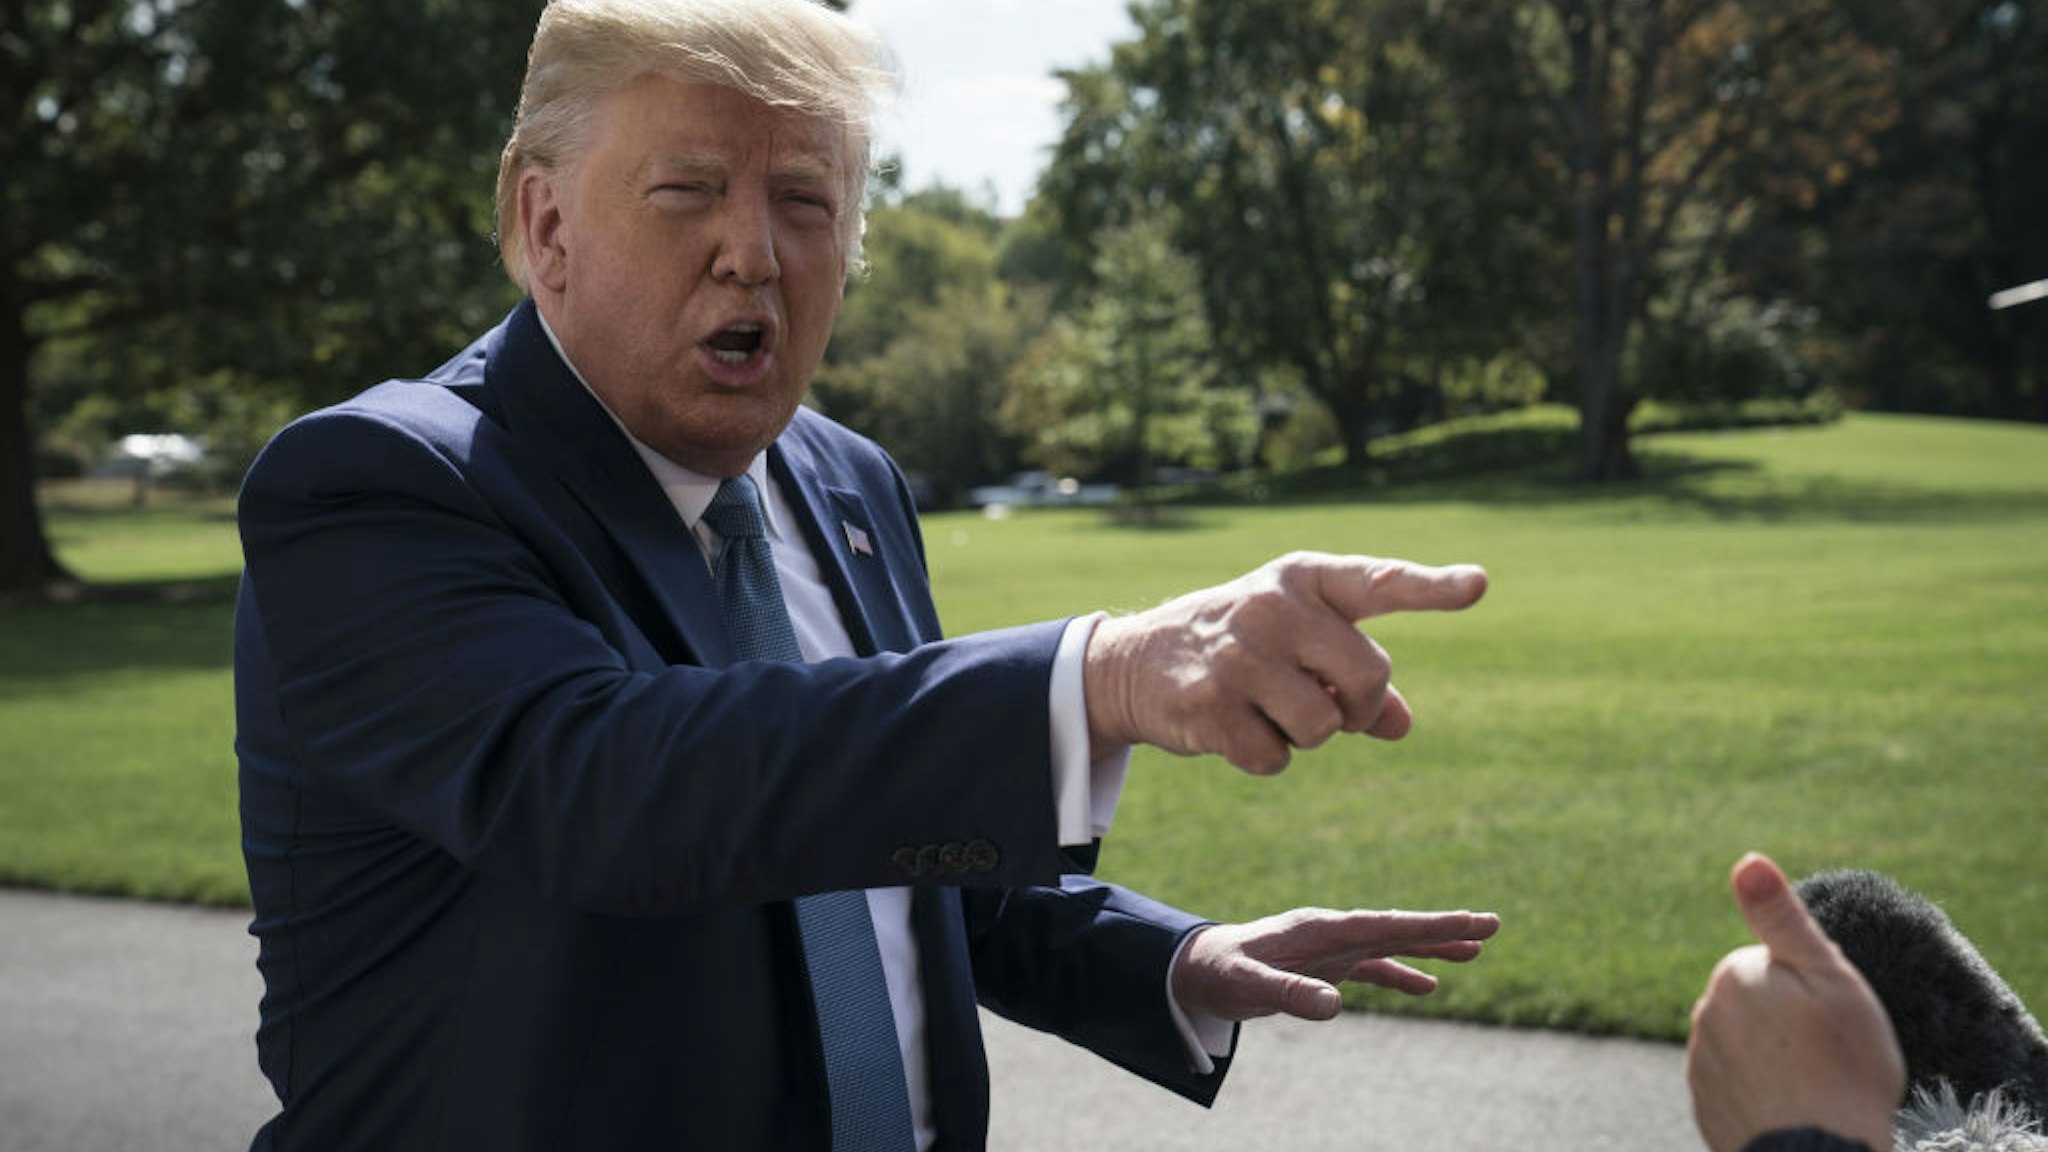 President Donald Trump speaks to members of the media outside of the White House in Washington, D.C., U.S., on Friday, Oct. 4, 2019.